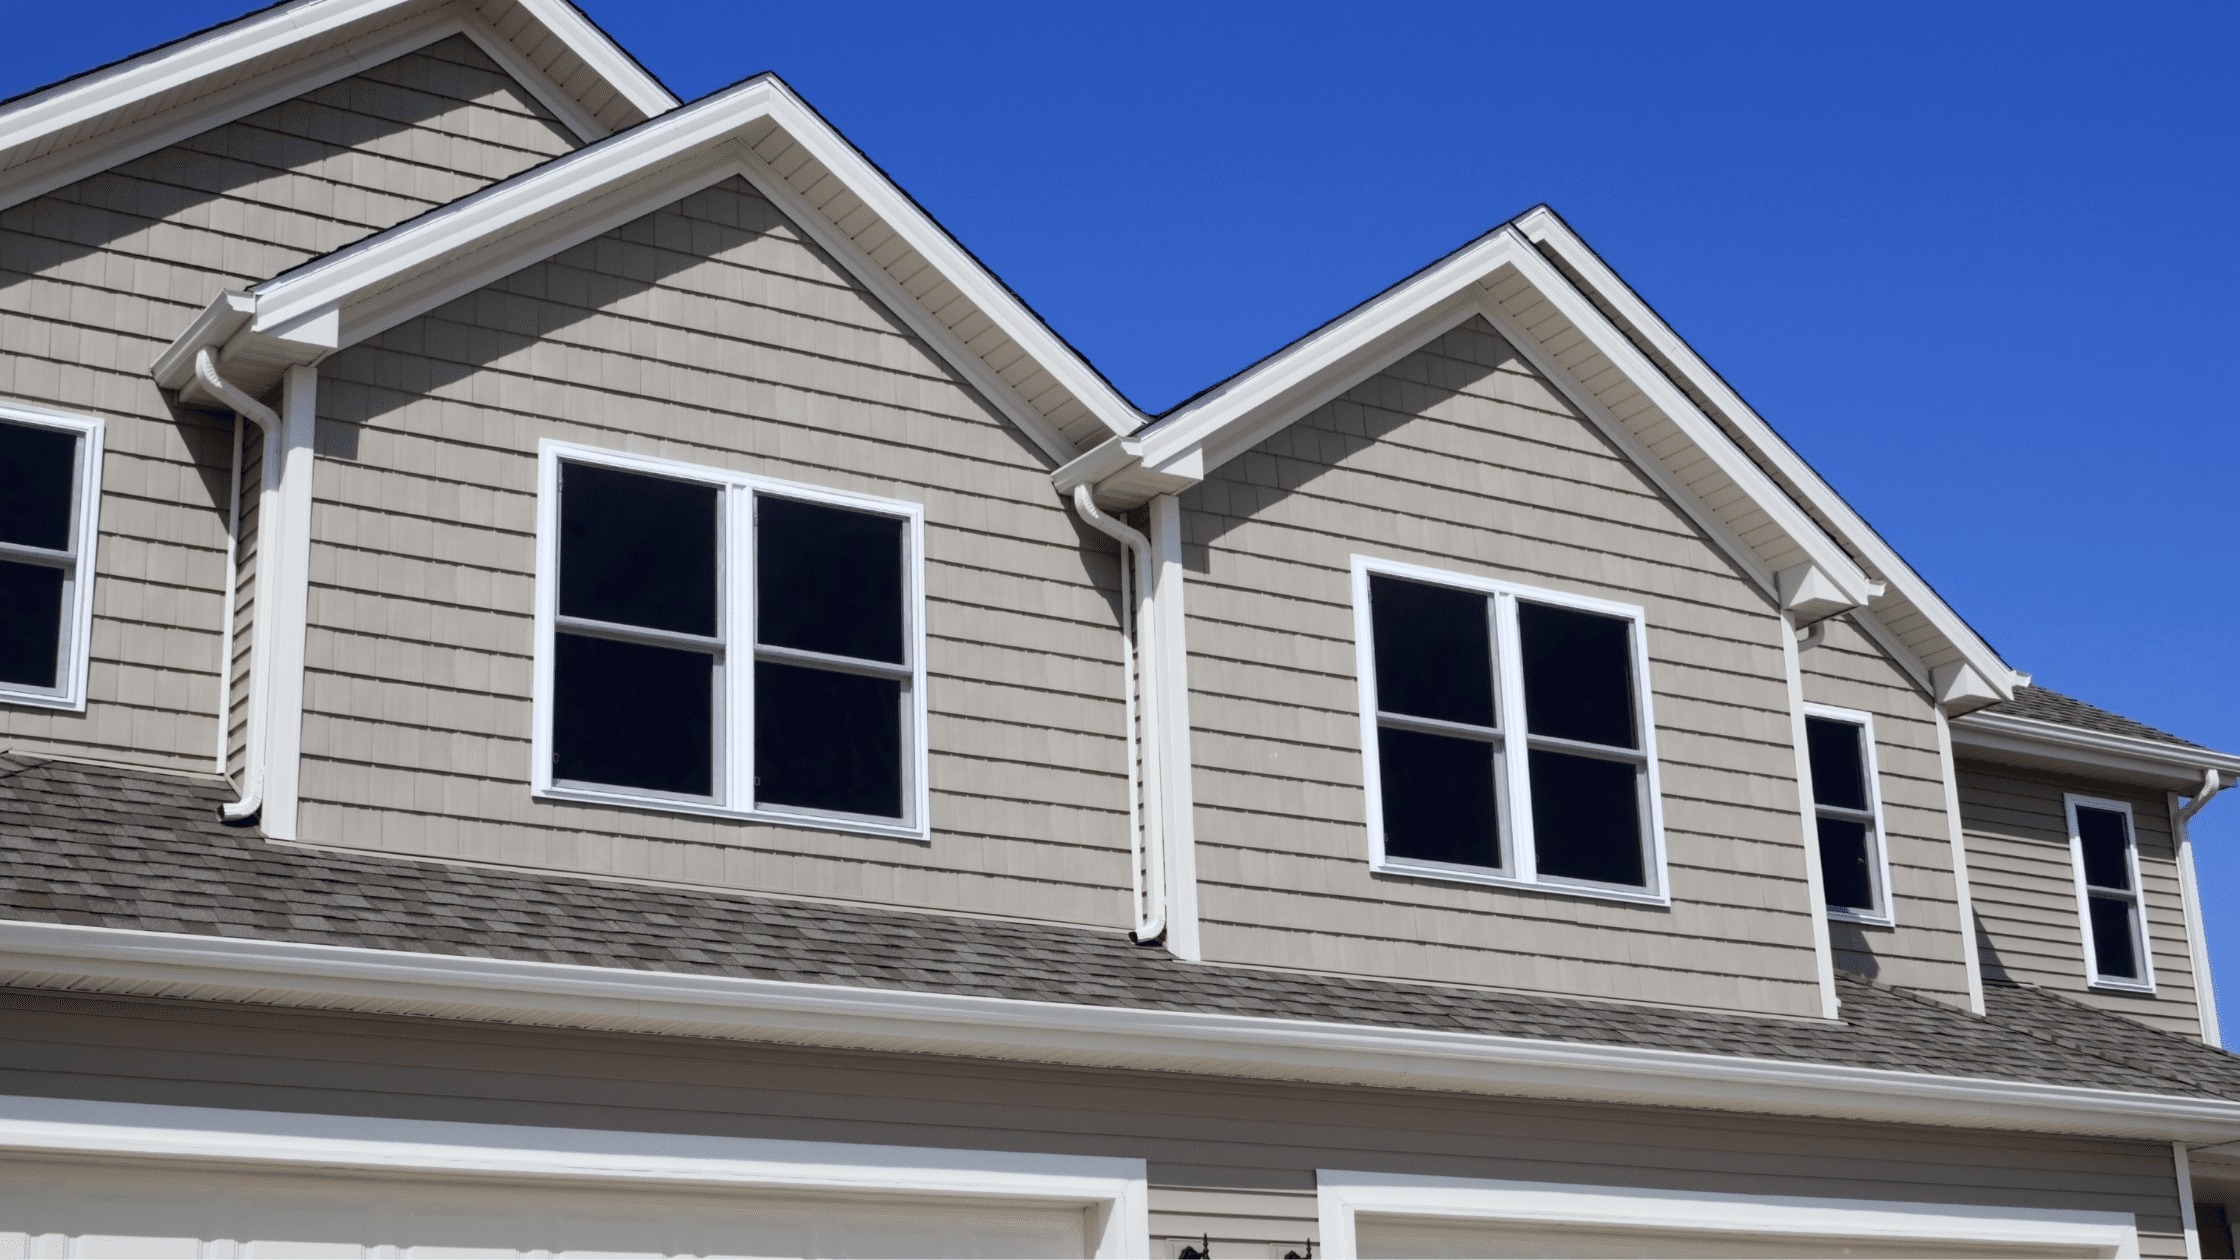 The Do’s and Don’ts of Maintaining Your Home’s Siding